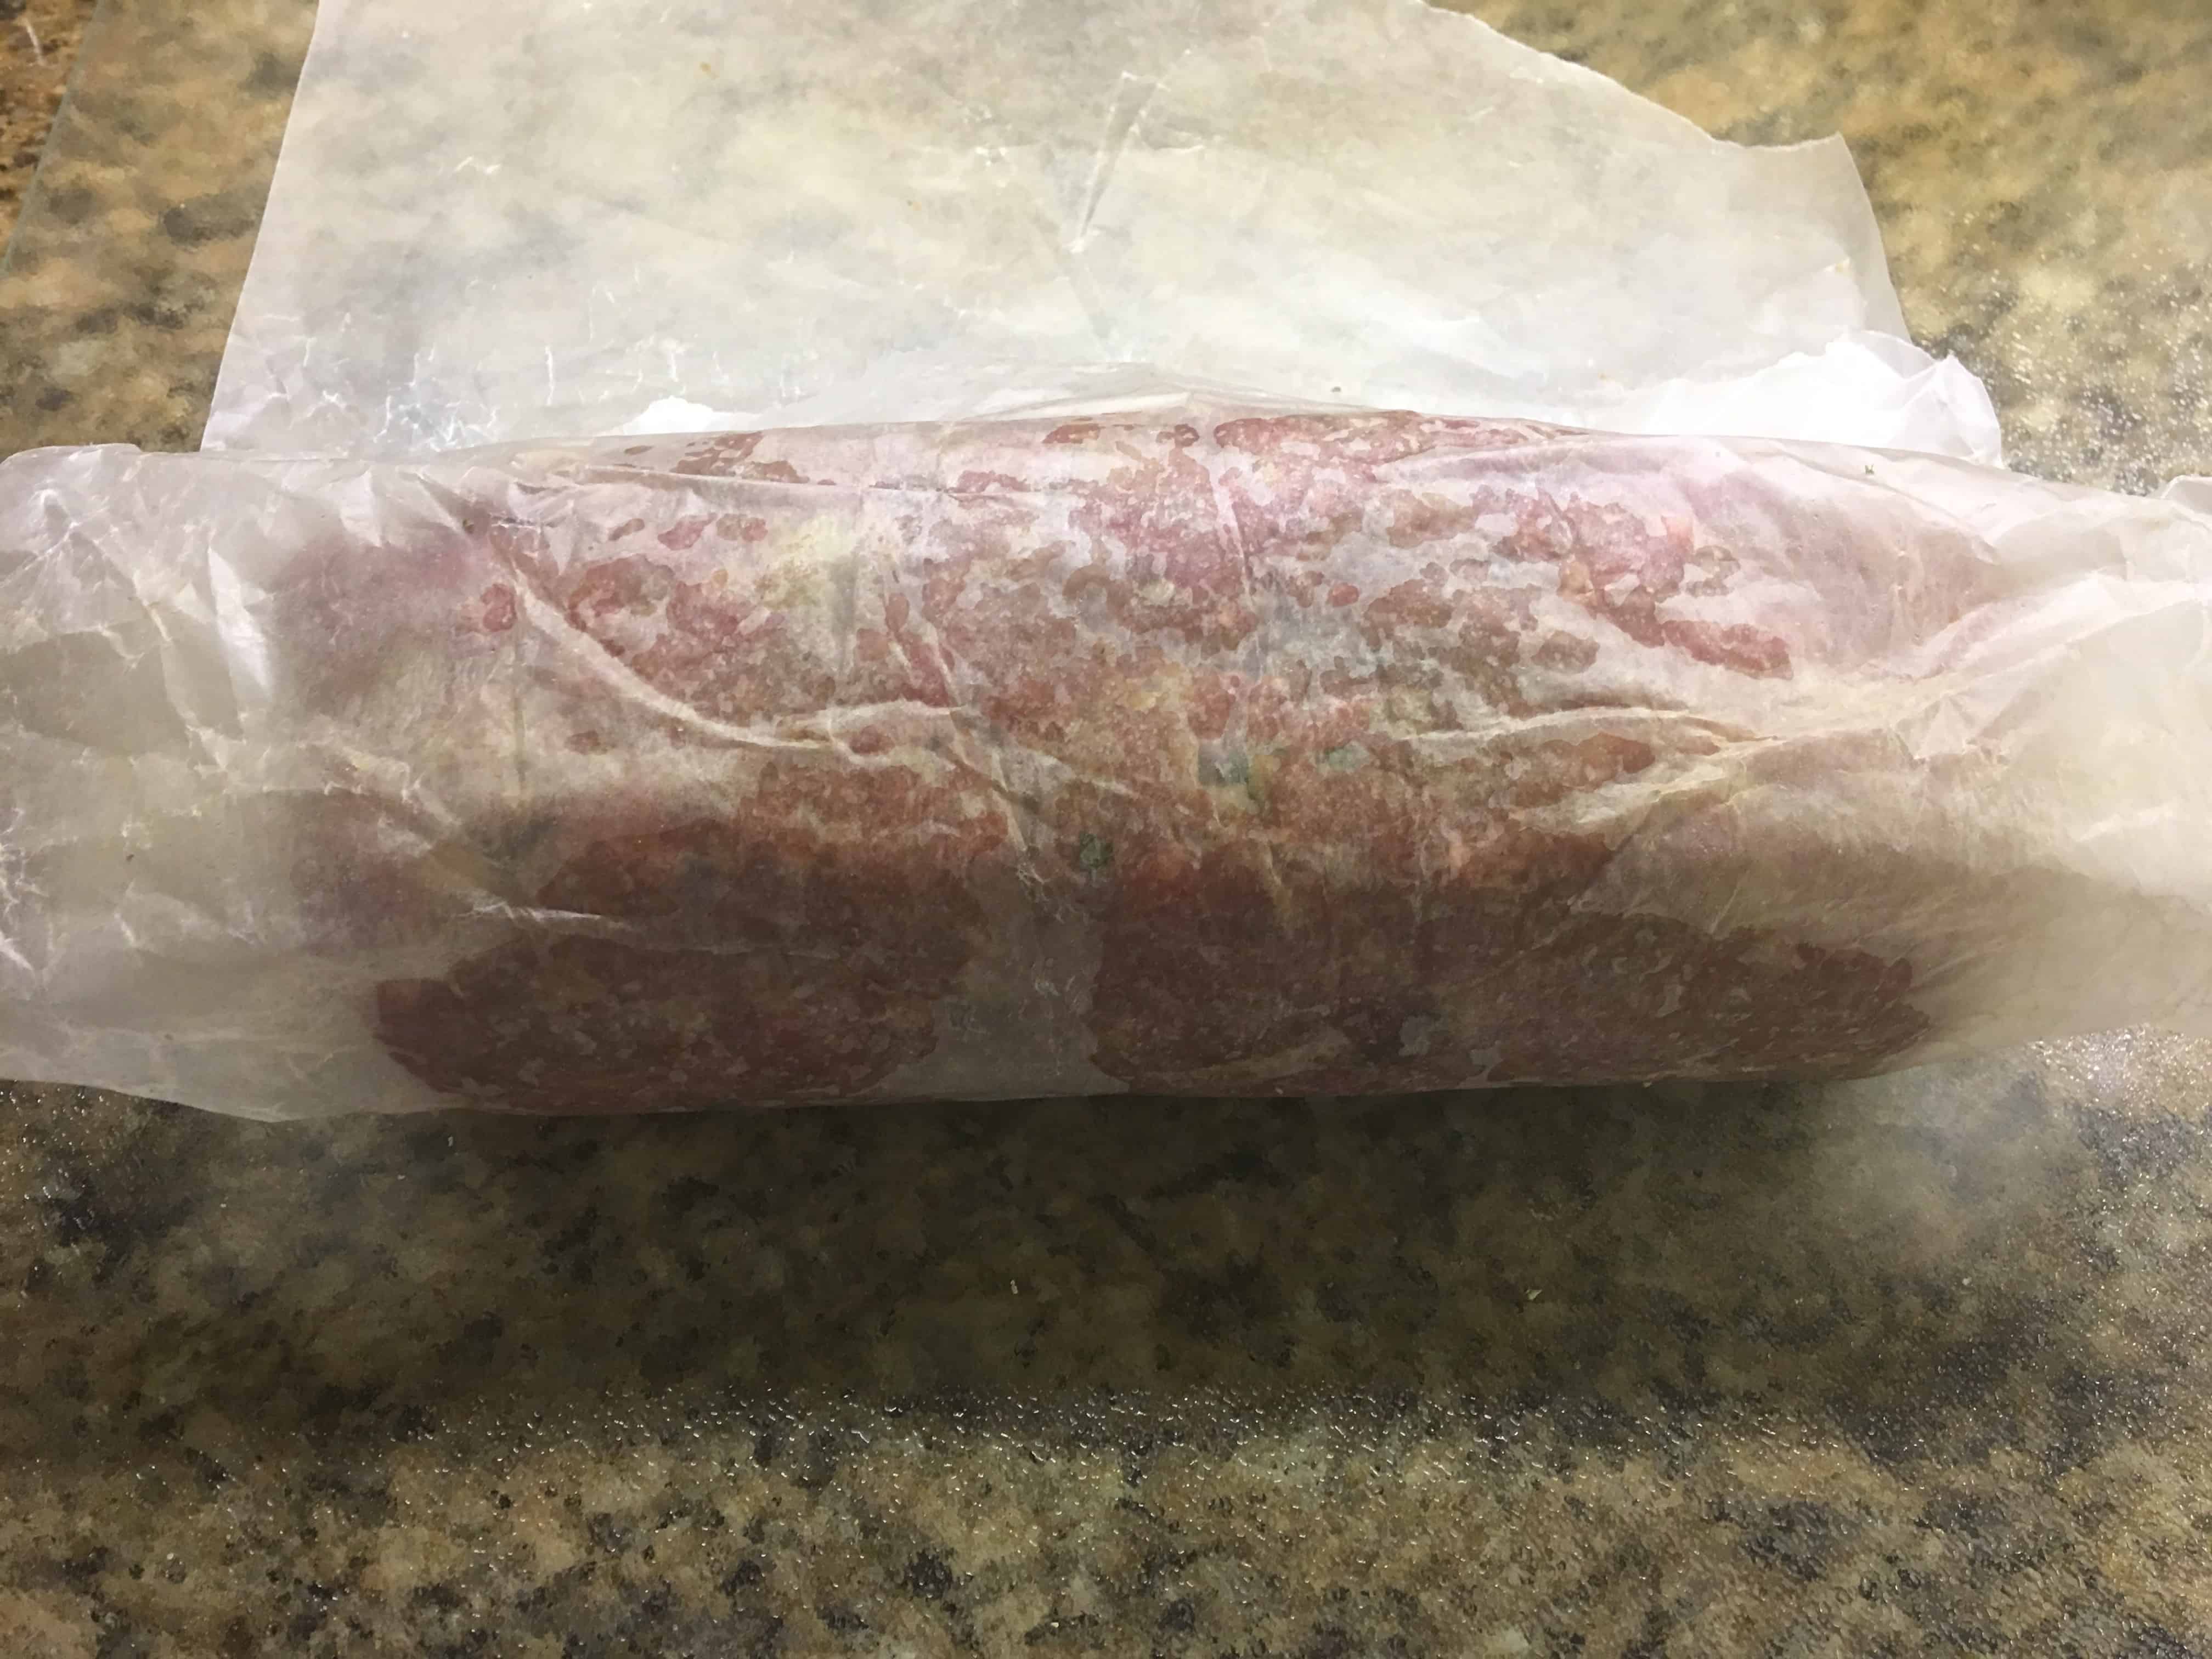 Meatloaf wrapped into shape by wax paper